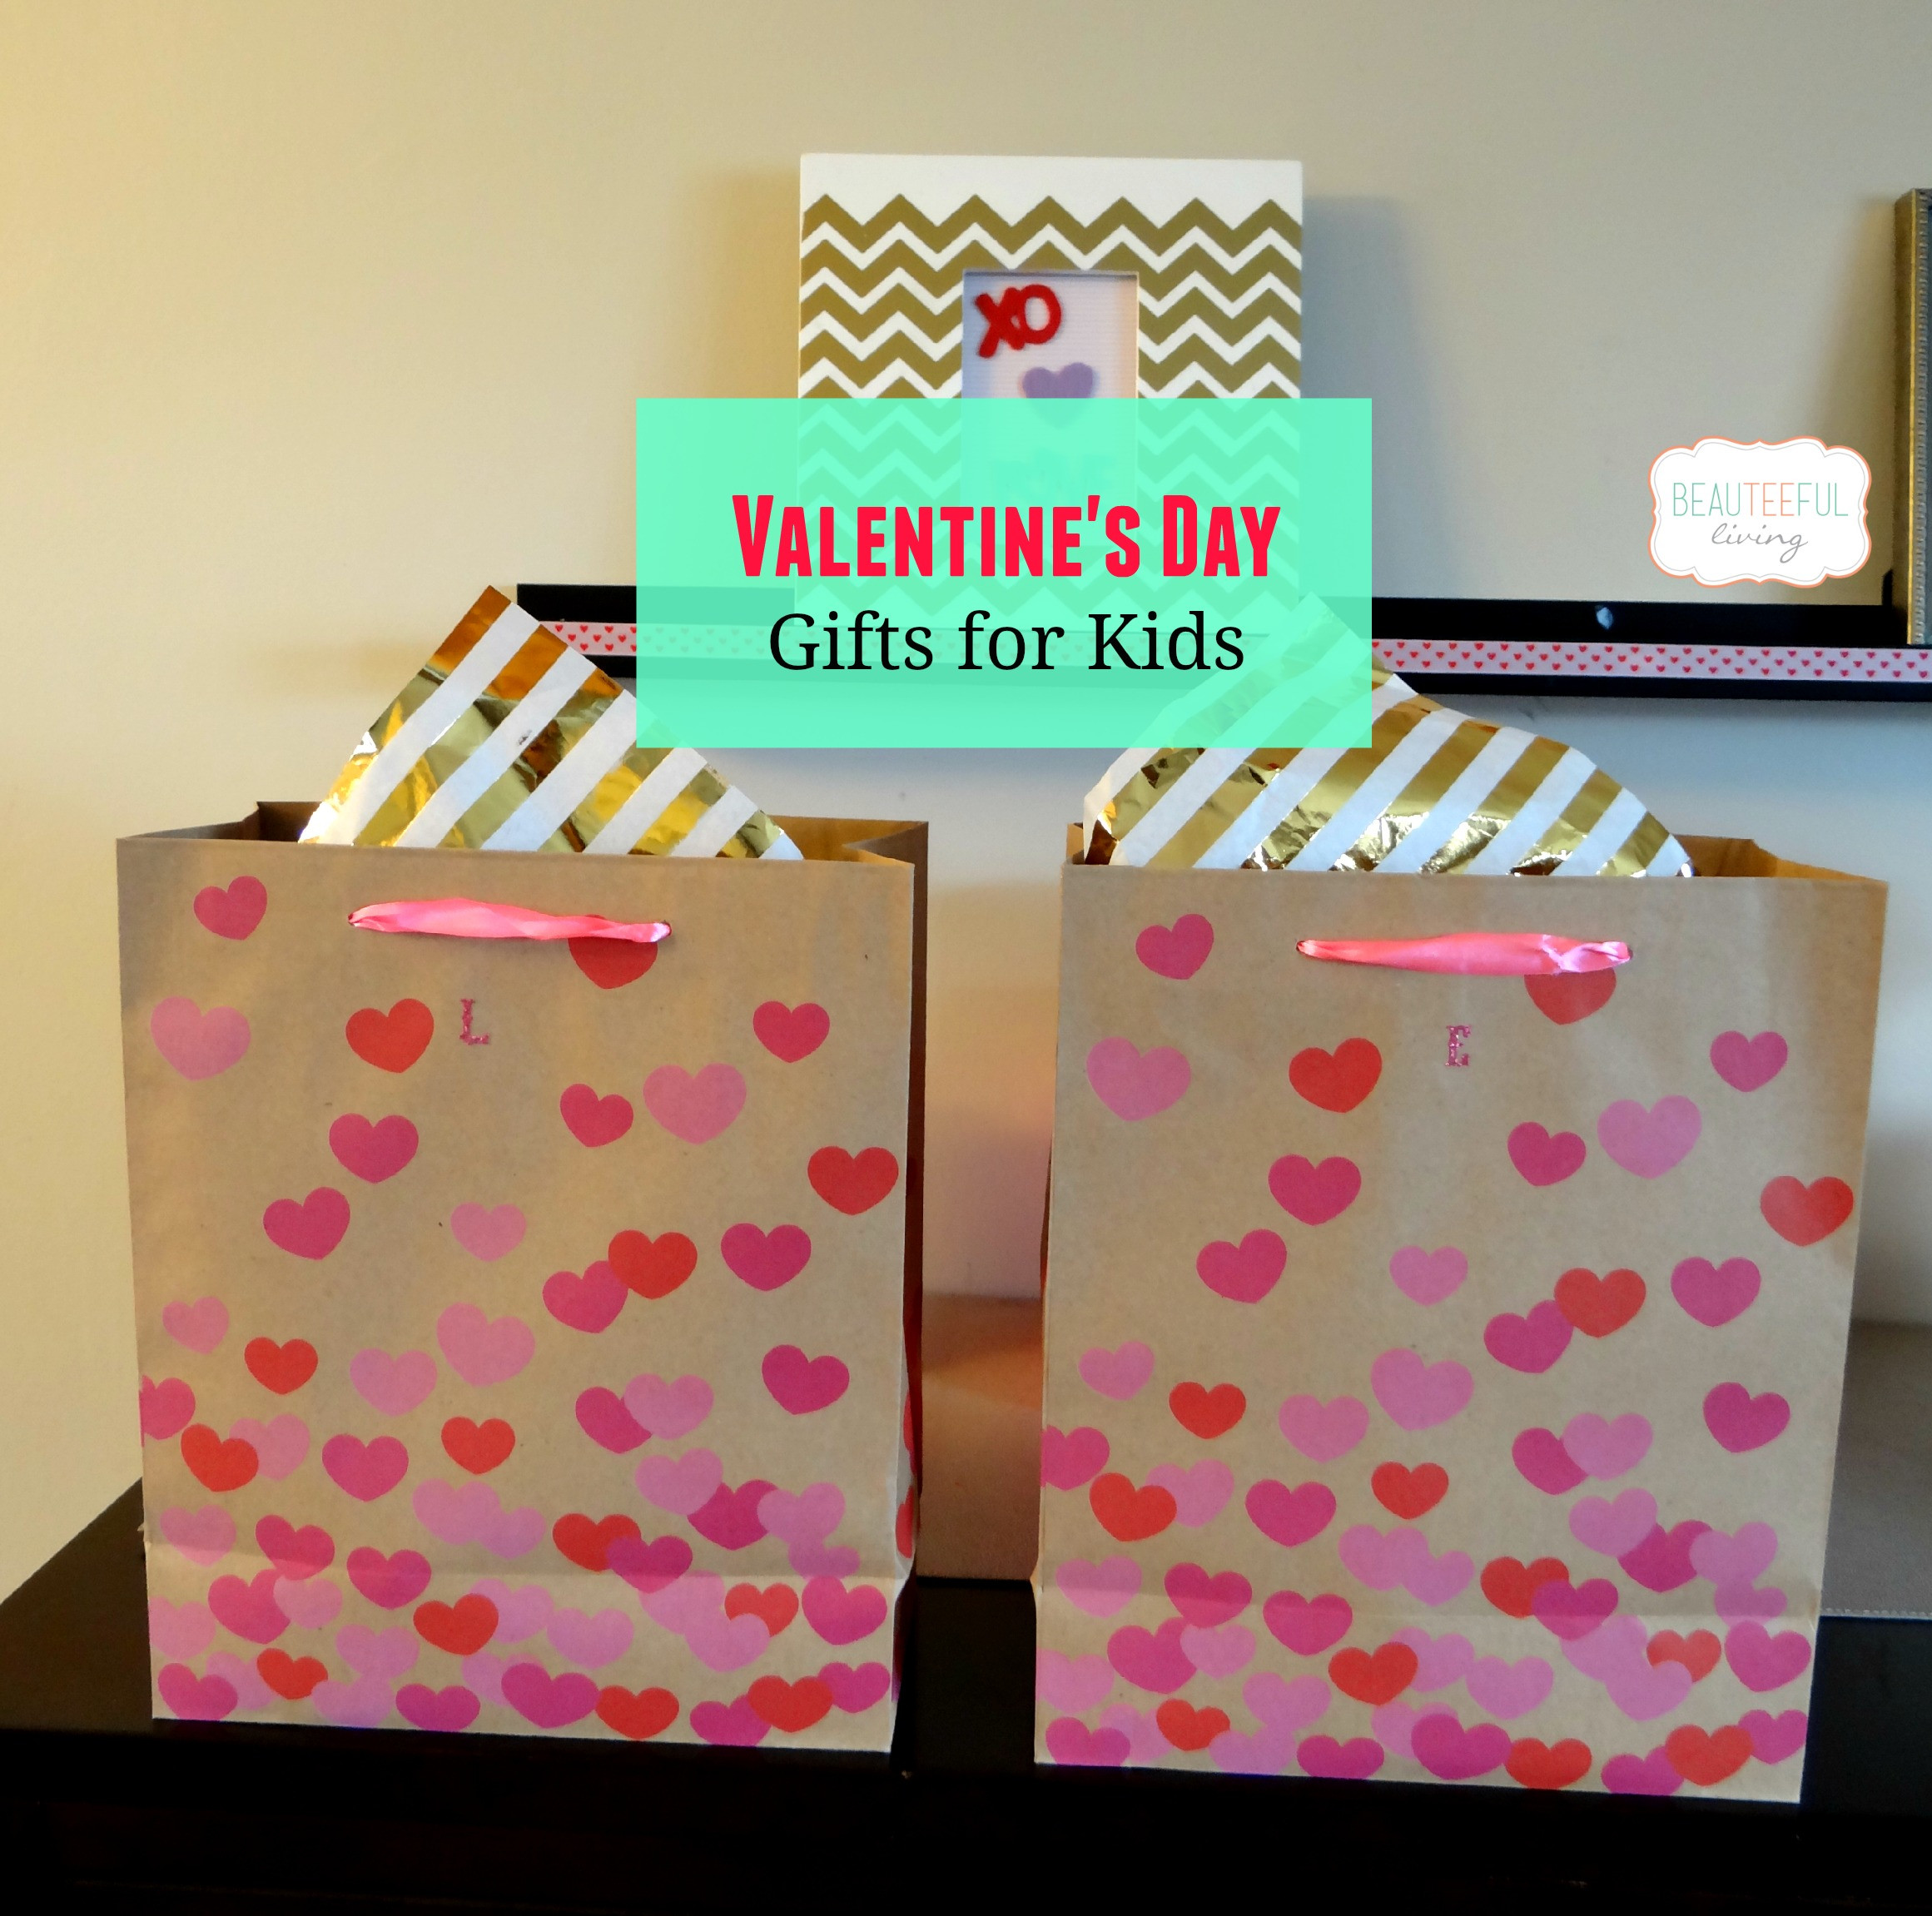 Valentine Gift Ideas For Toddlers
 Valentine s Day Gifts for Kids BEAUTEEFUL Living